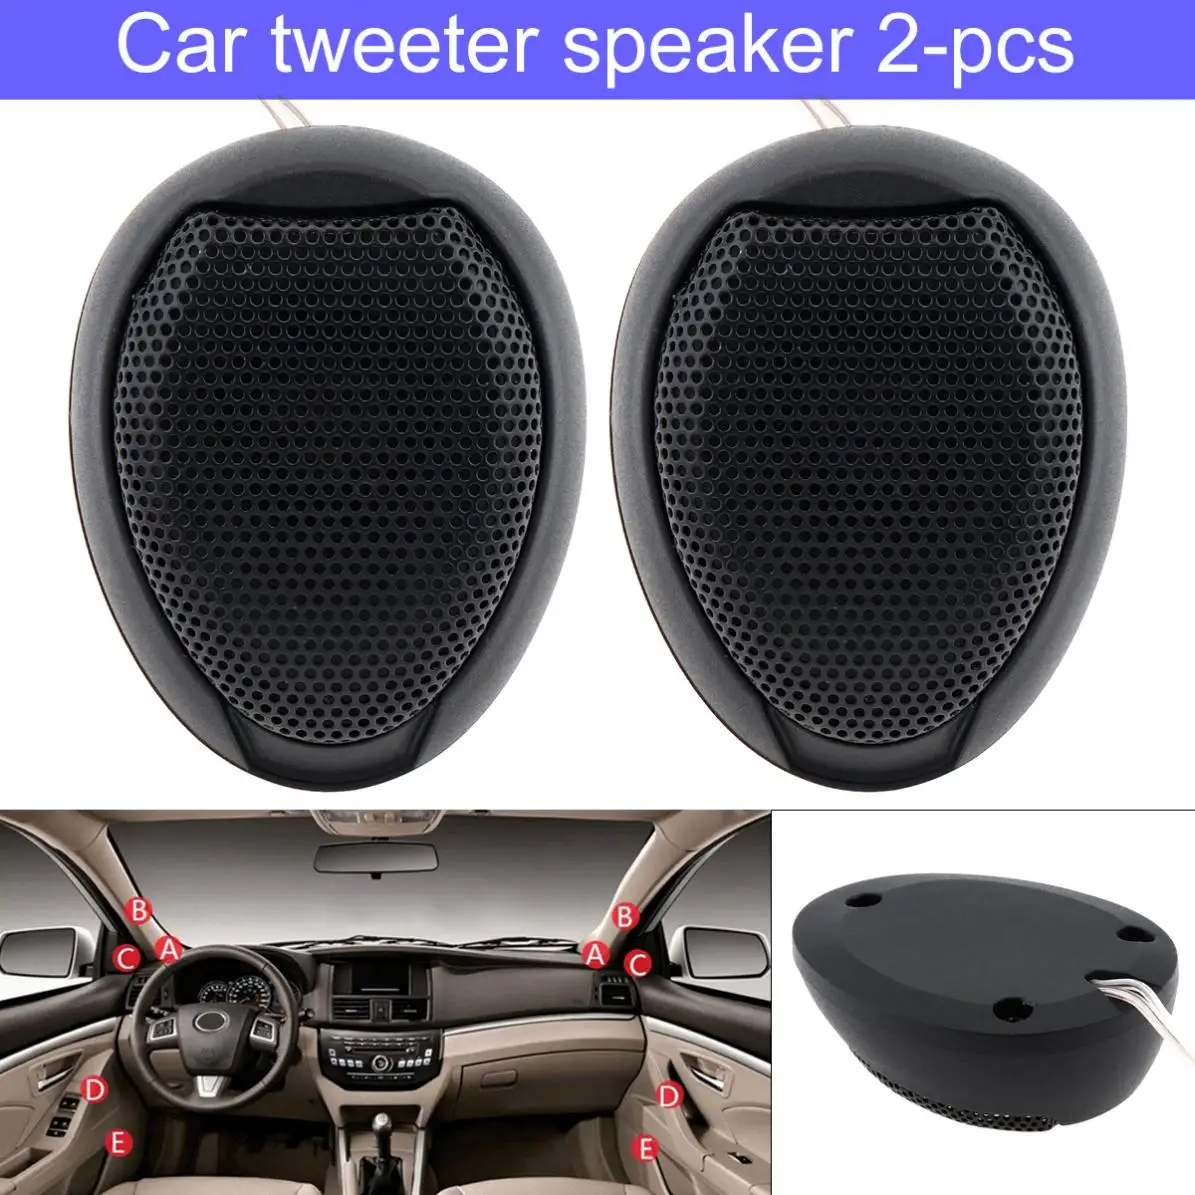 

Universal 2pcs 1000W TW-106 High Efficiency Mini Dome Tweeter Speakers for Car Audio Systems